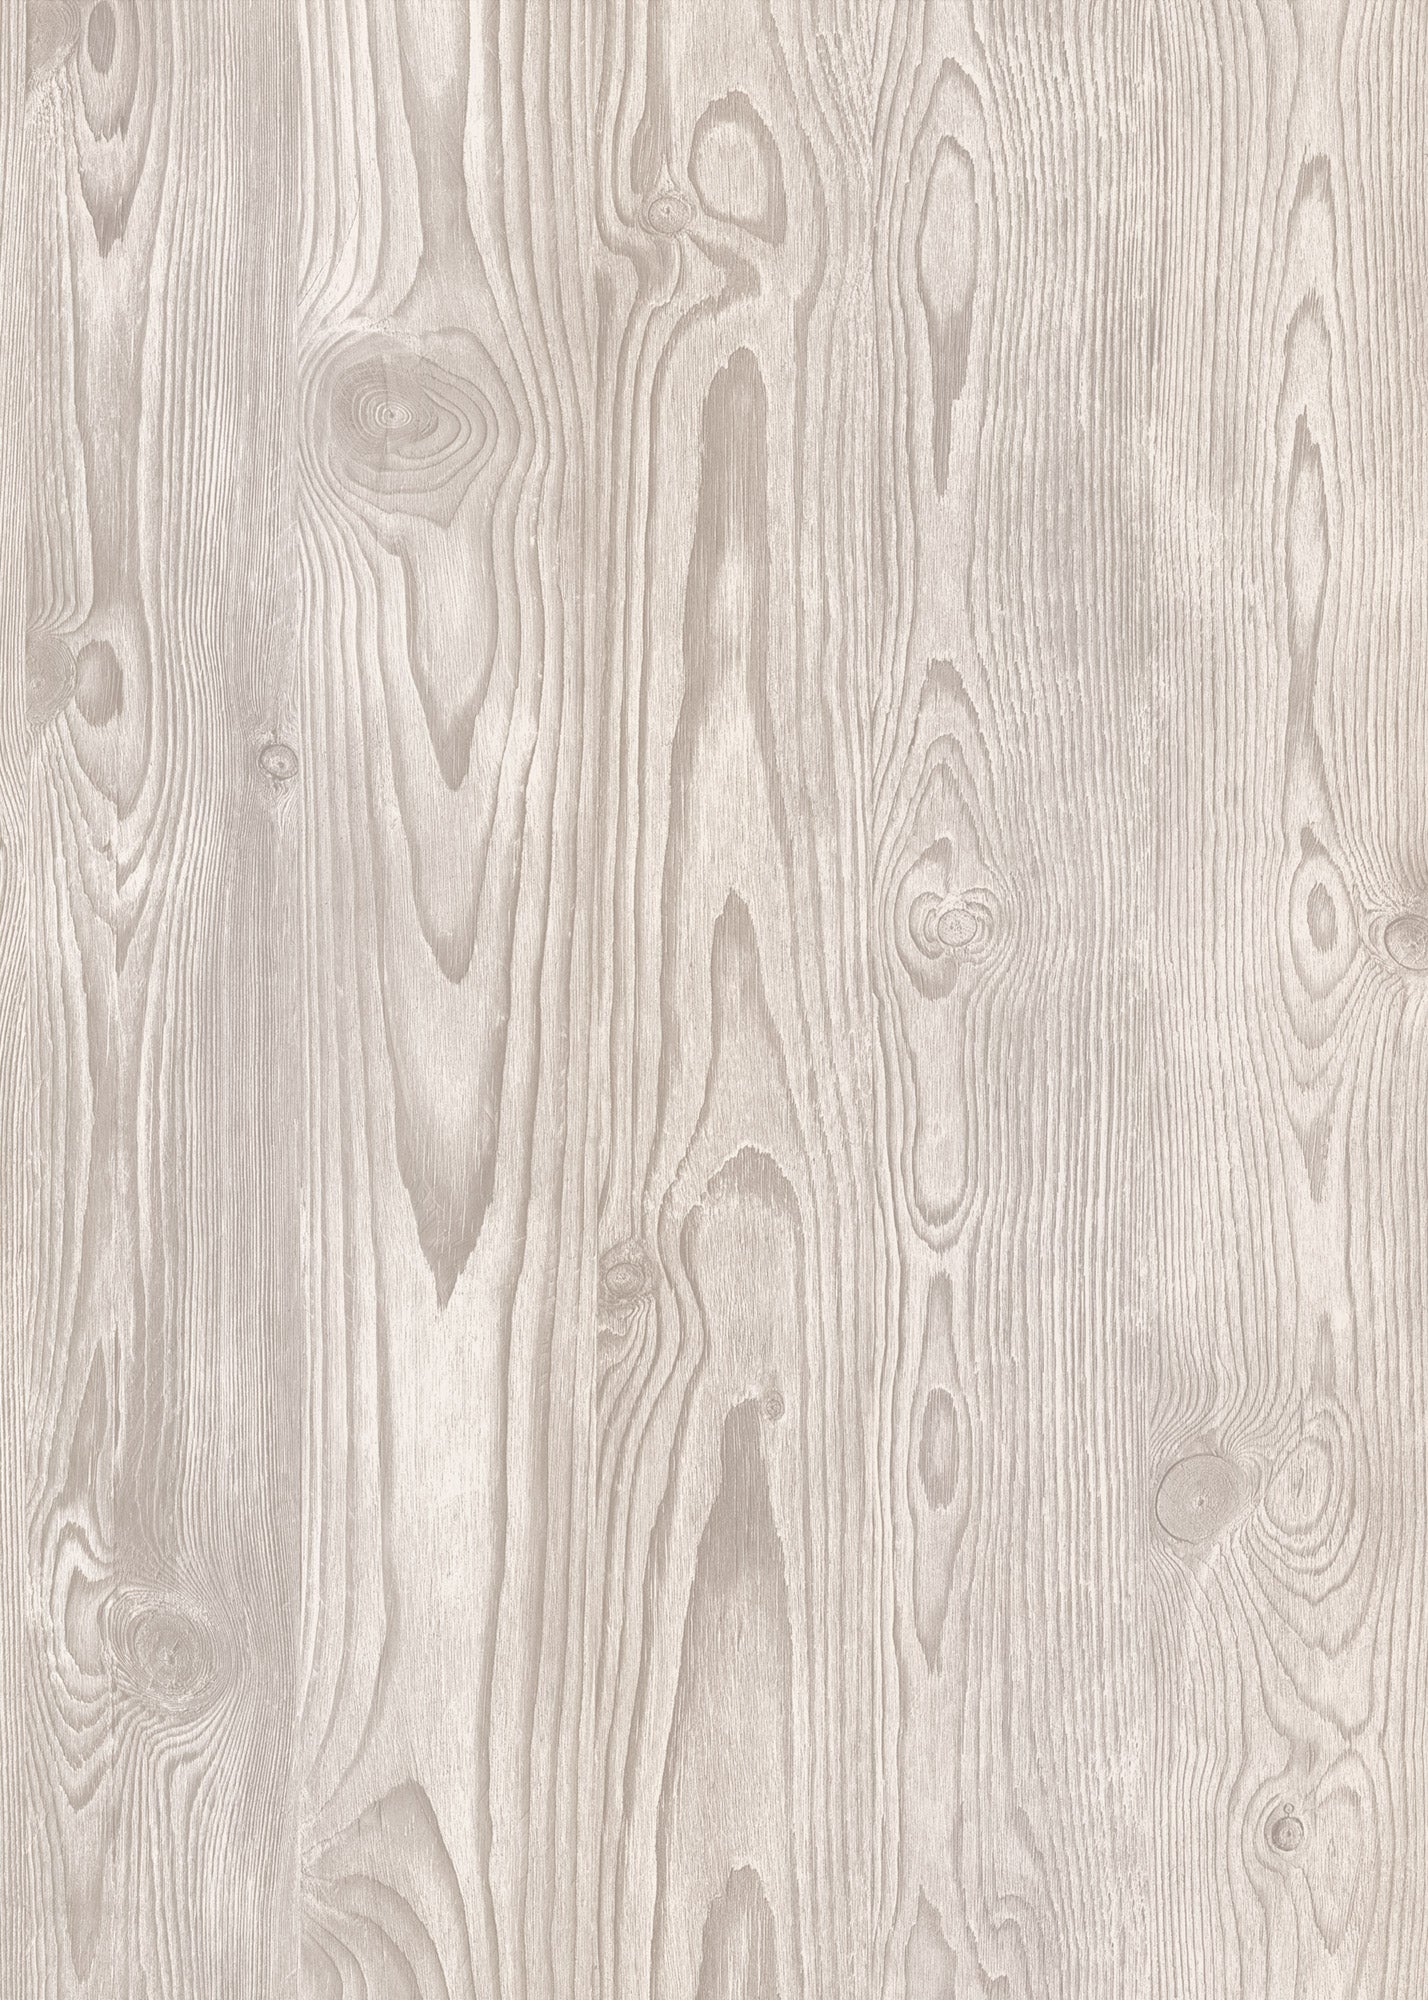 Ghost Wood Vinyl Photography Backdrop by Club Backdrops